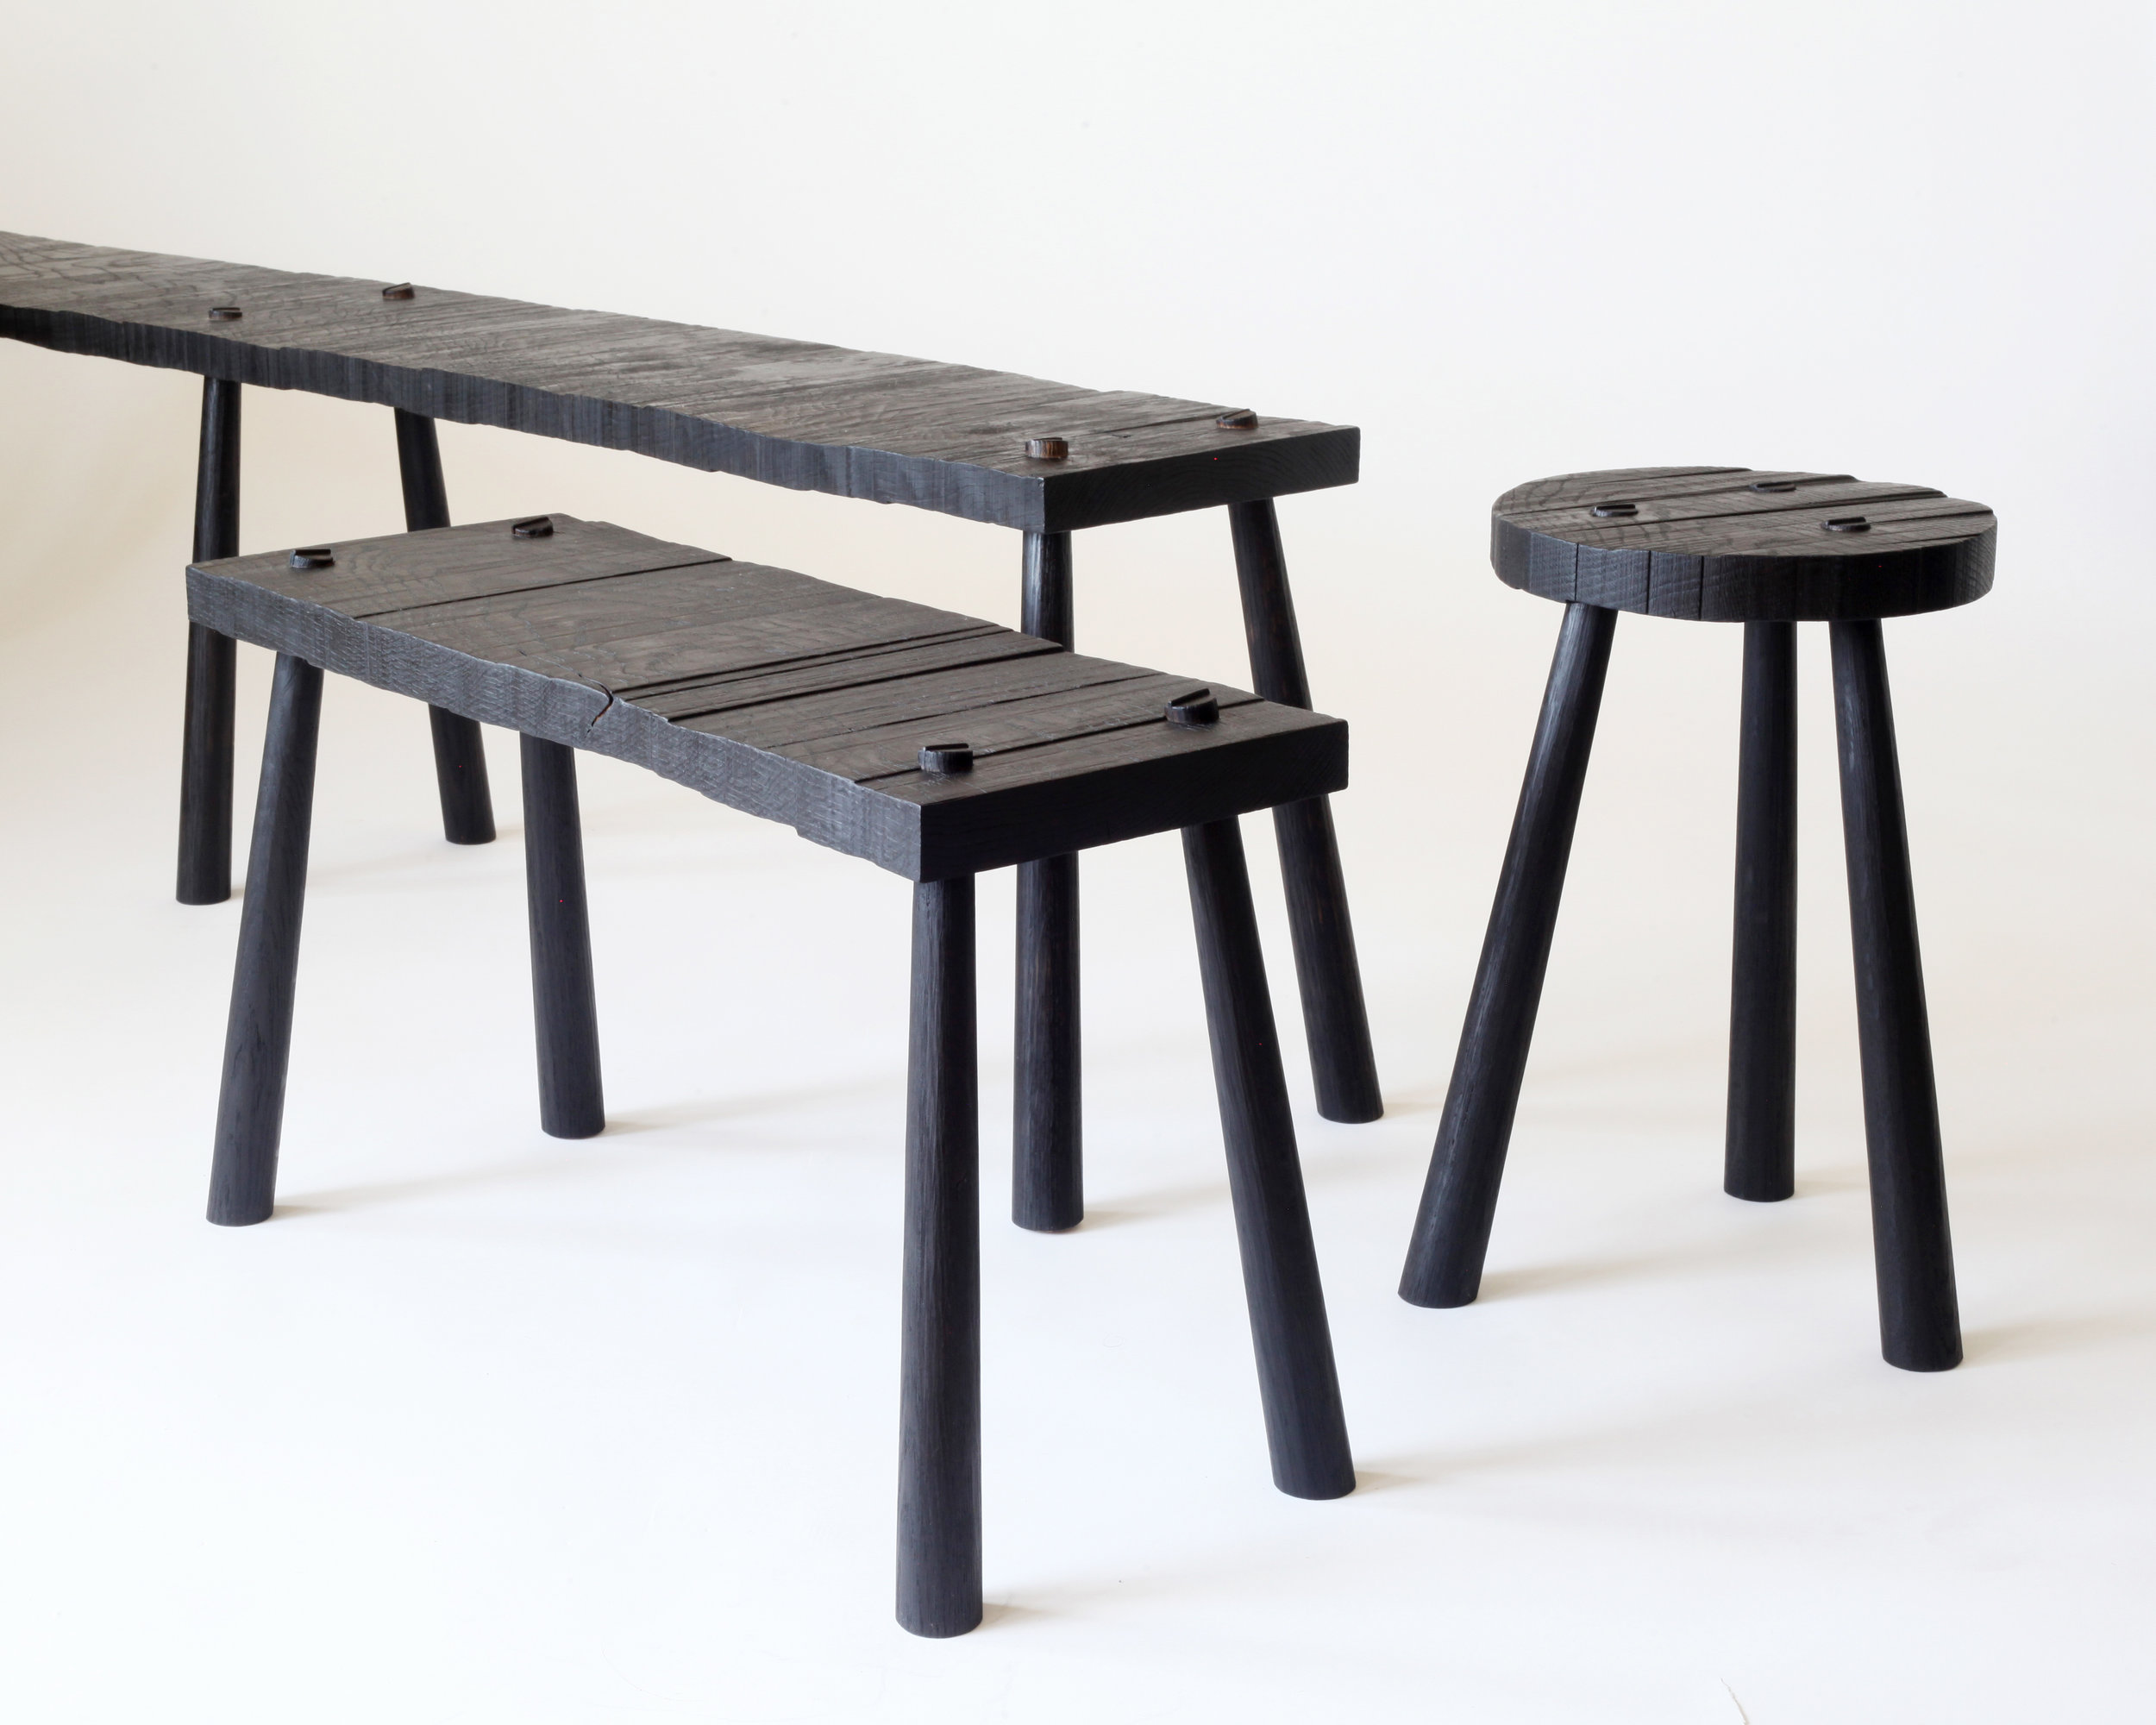  Roughsawn benches and stool-  Charred white oak 